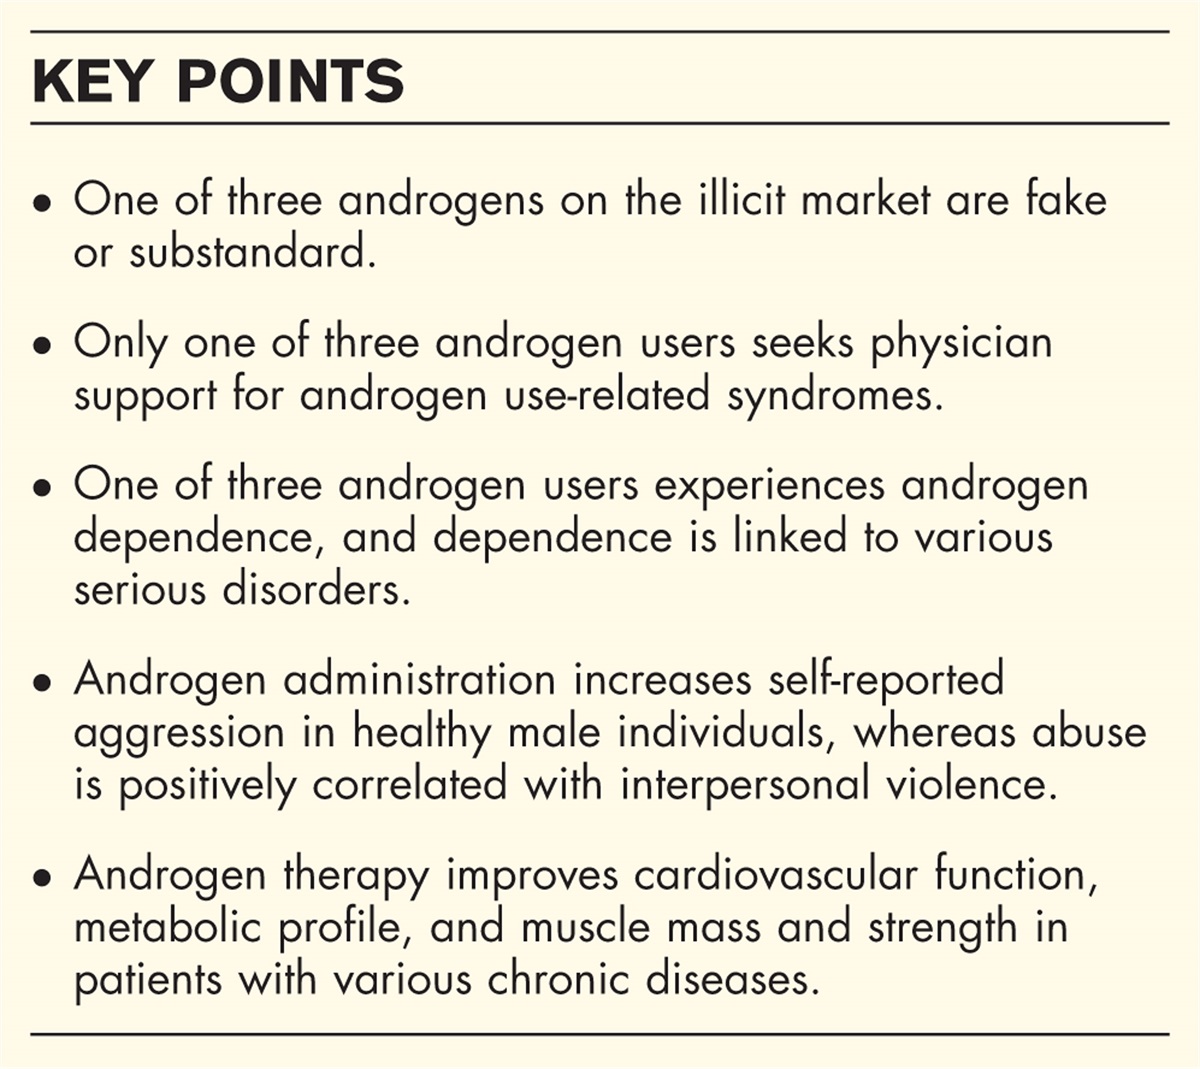 Systematic reviews and meta-analyses on androgen administration in humans: an umbrella review